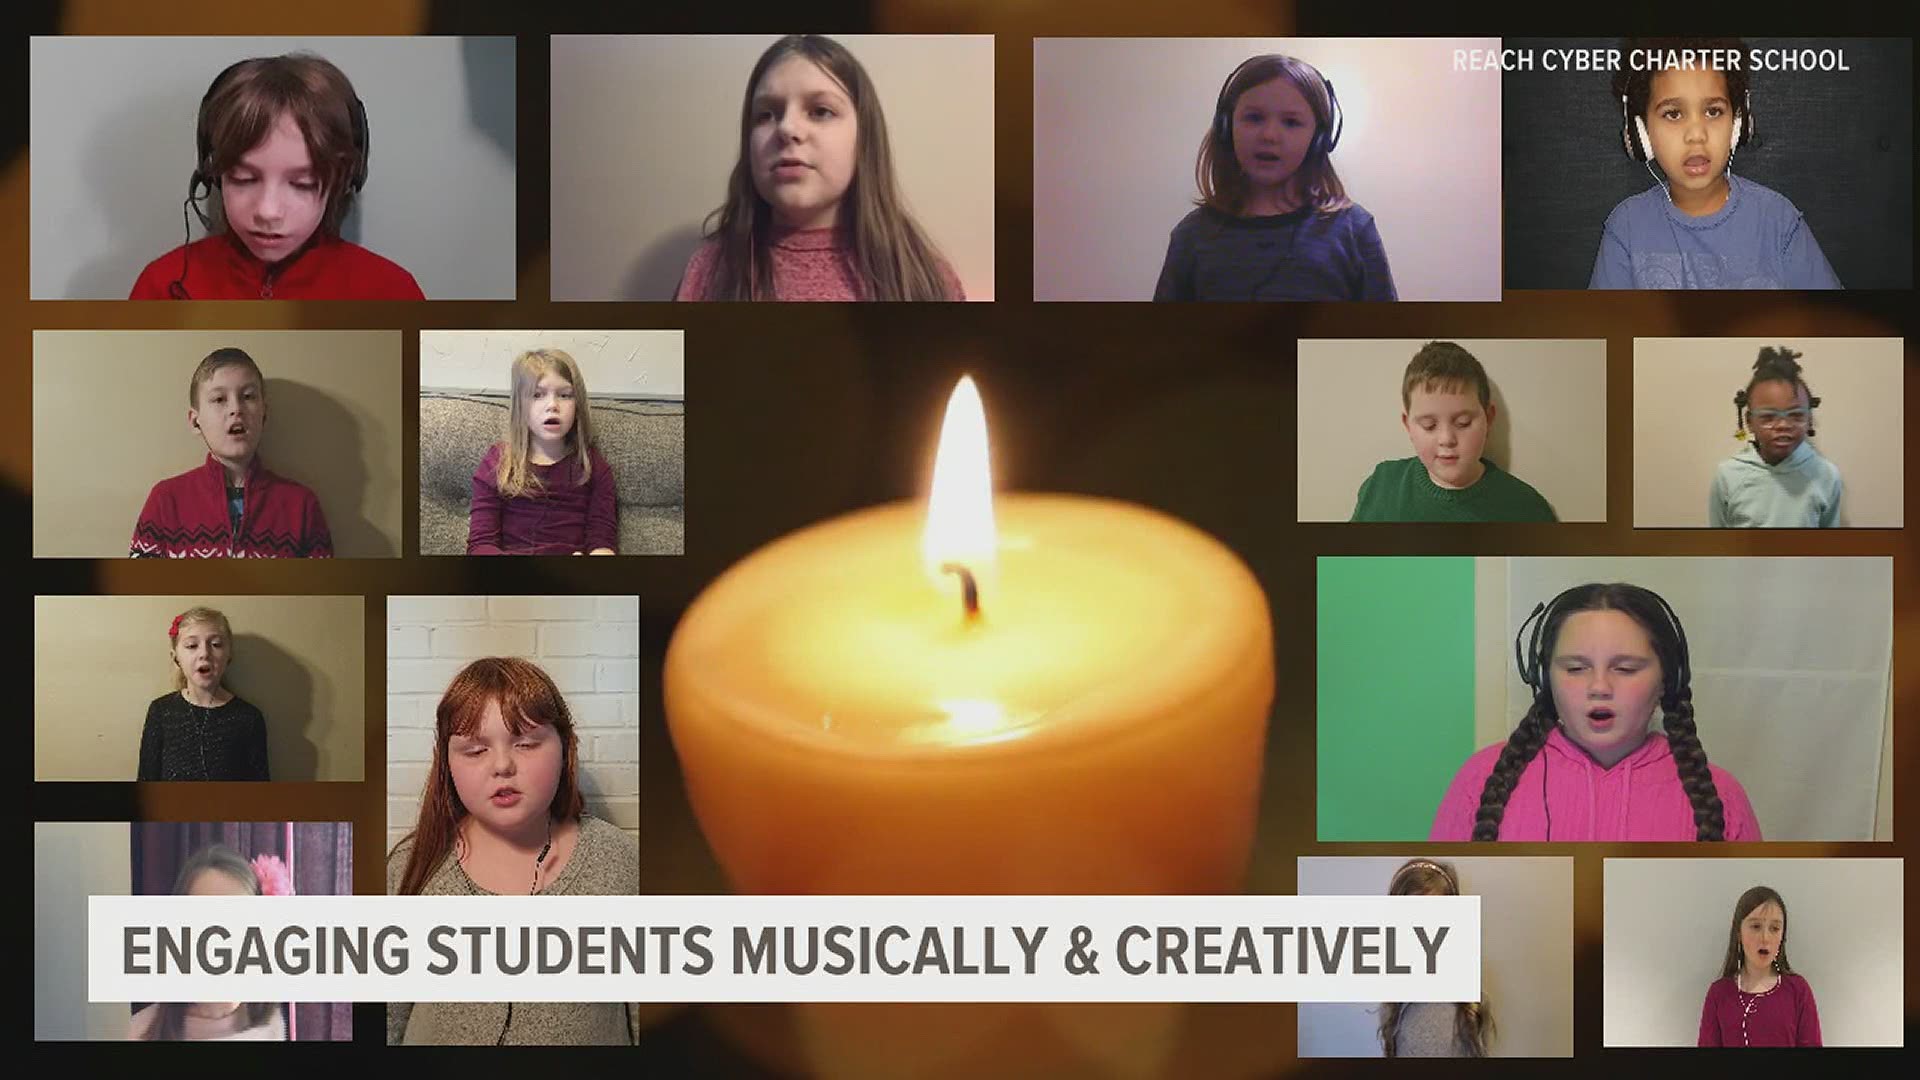 Dauphin County music teacher creates innovative music projects to keep students immersed in music classes